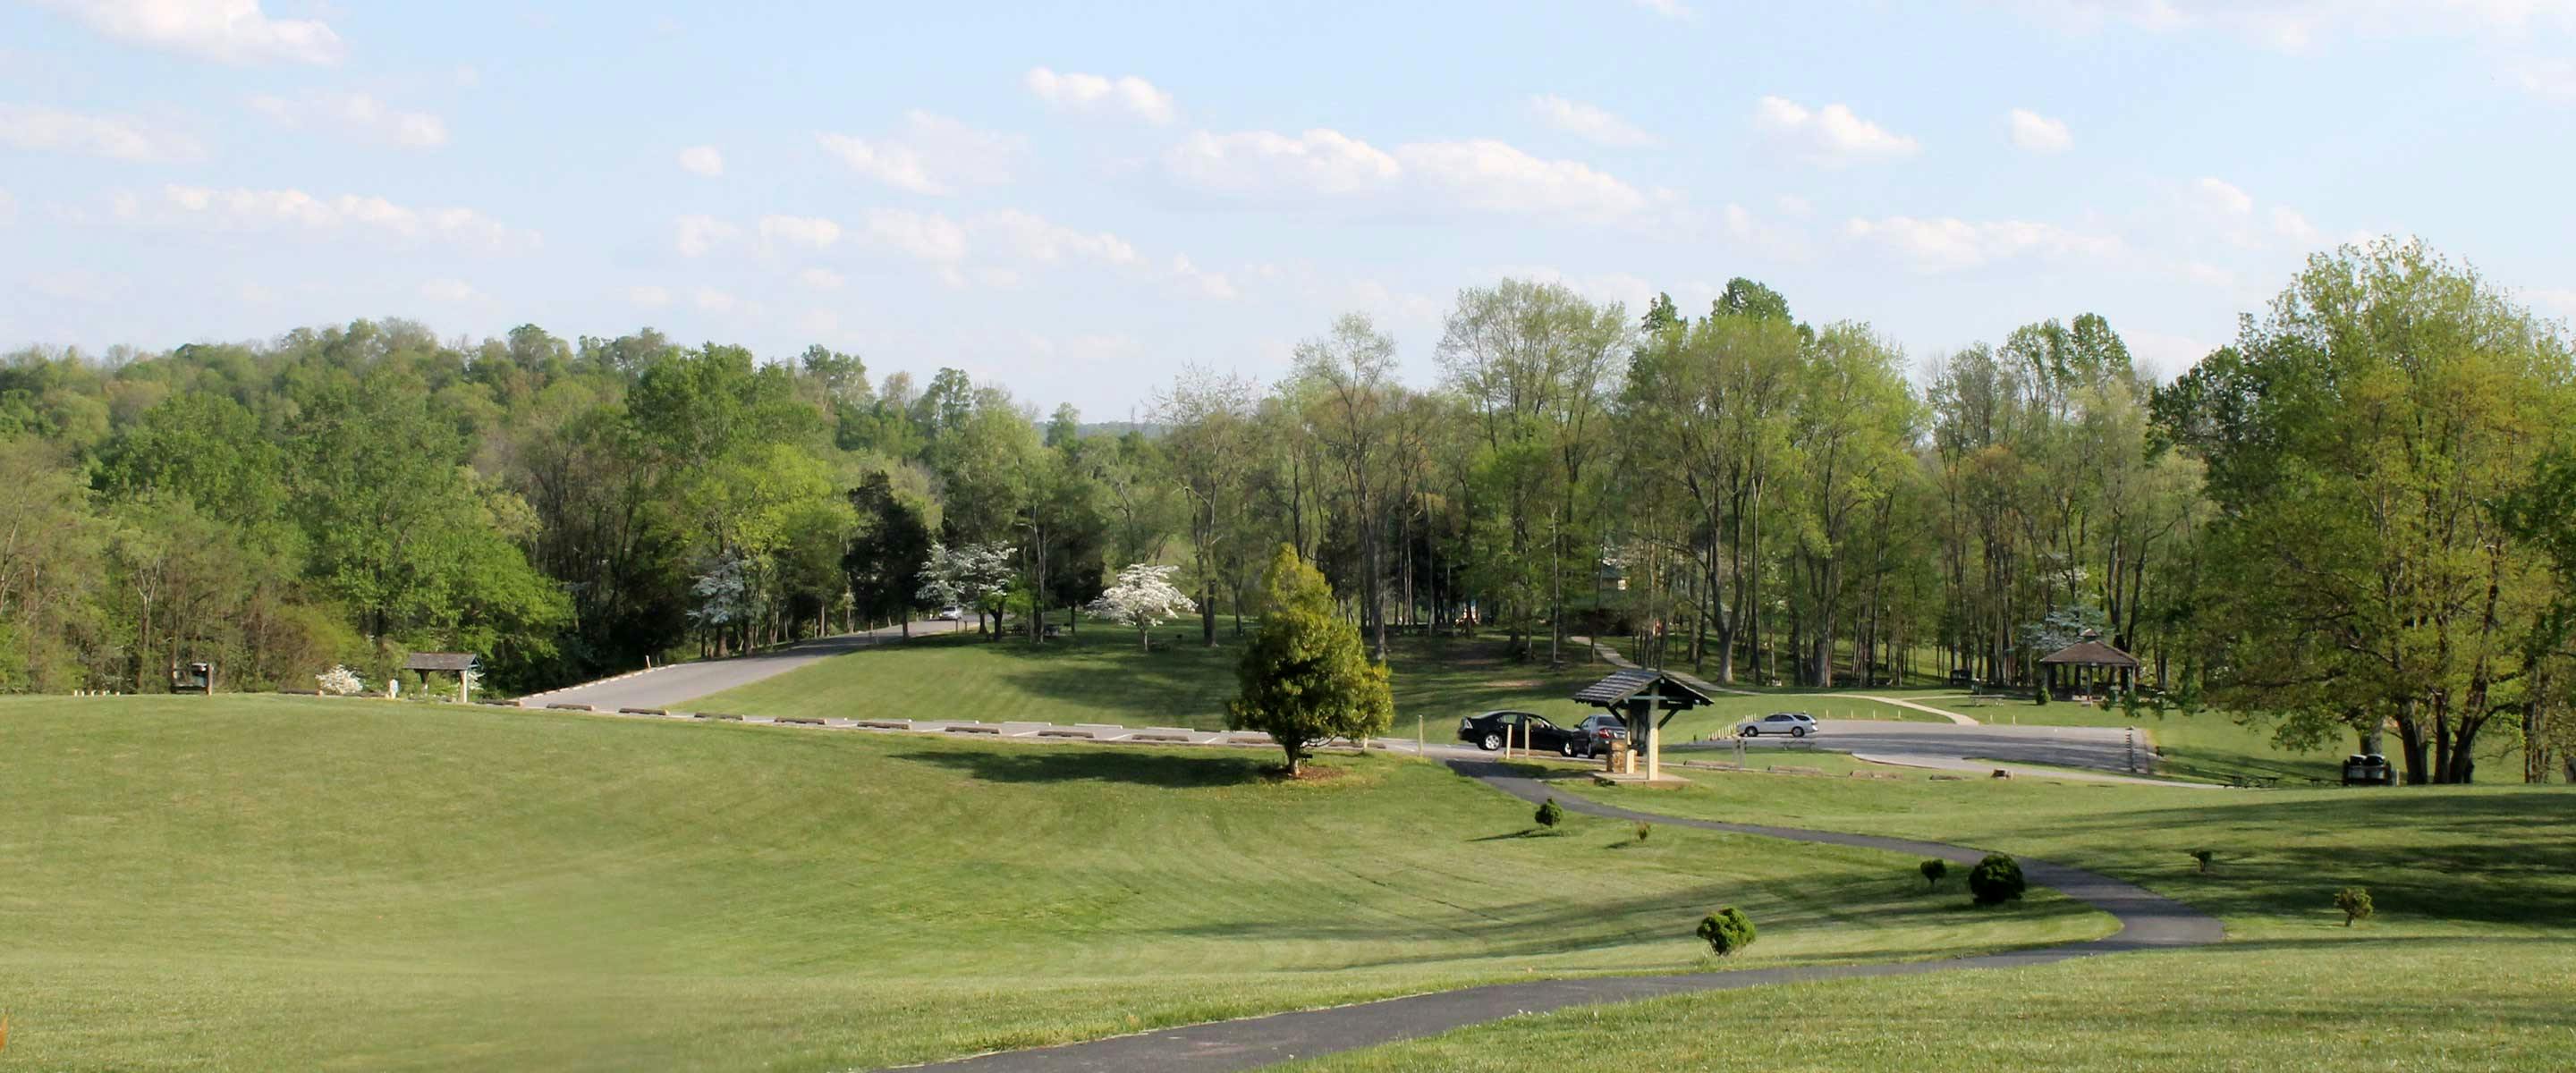 Panoramic view of hillside and paved trail at Hayswood Nature Preserve